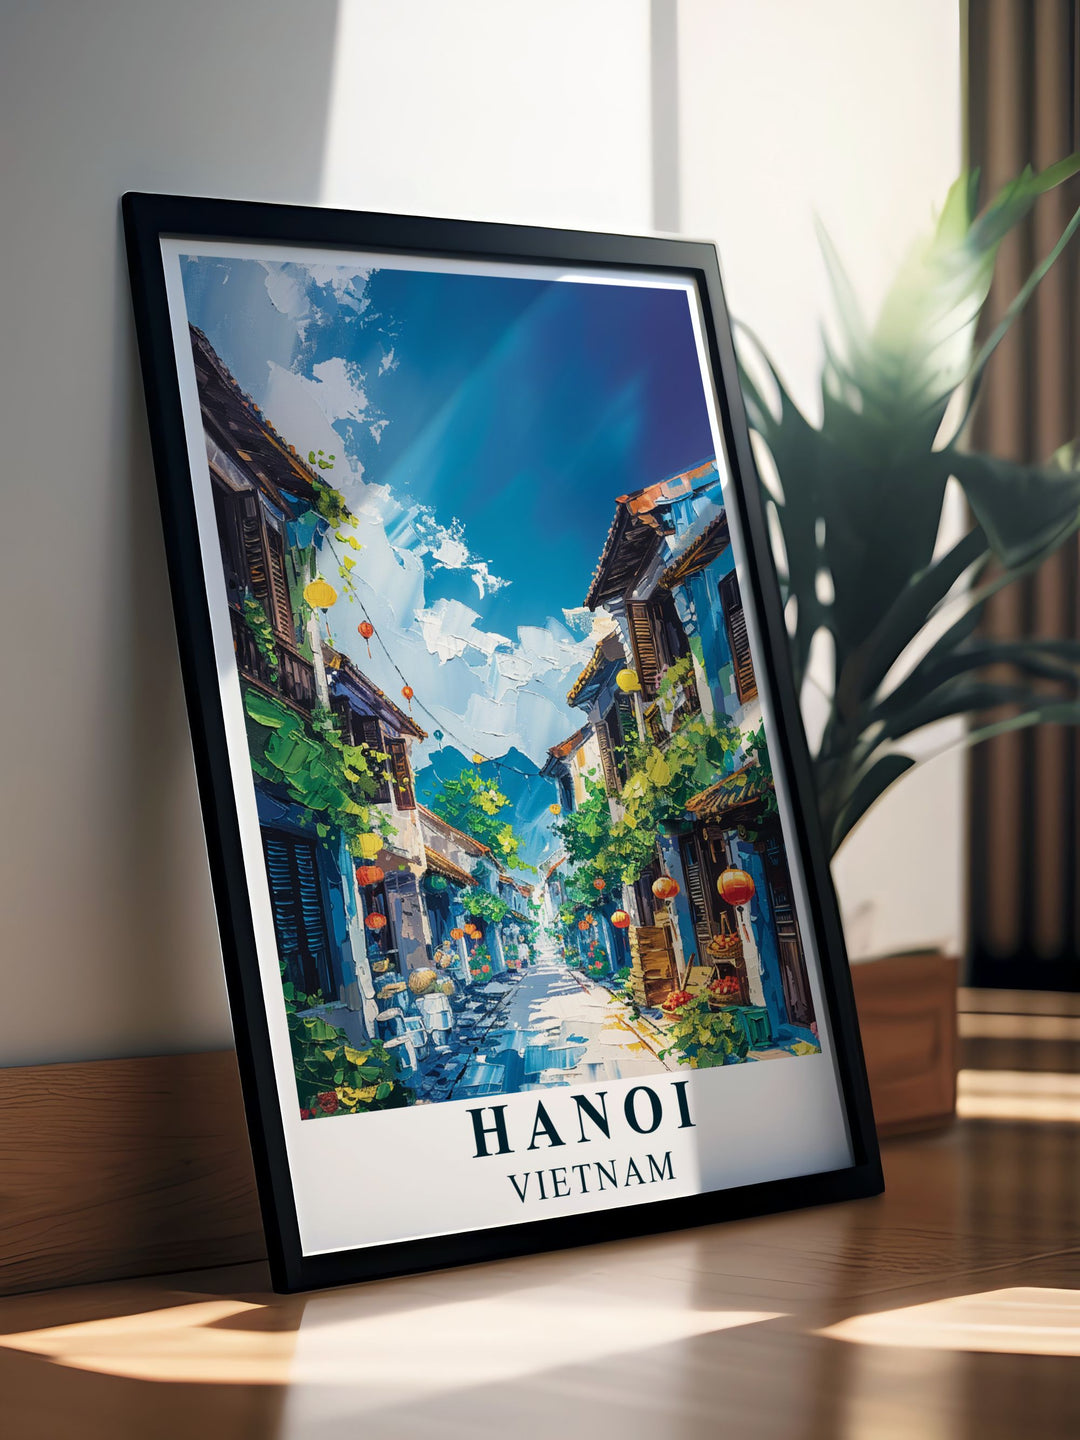 Featuring the bustling markets and narrow streets of Hanois Old Quarter, this travel poster is a celebration of the citys rich cultural heritage.